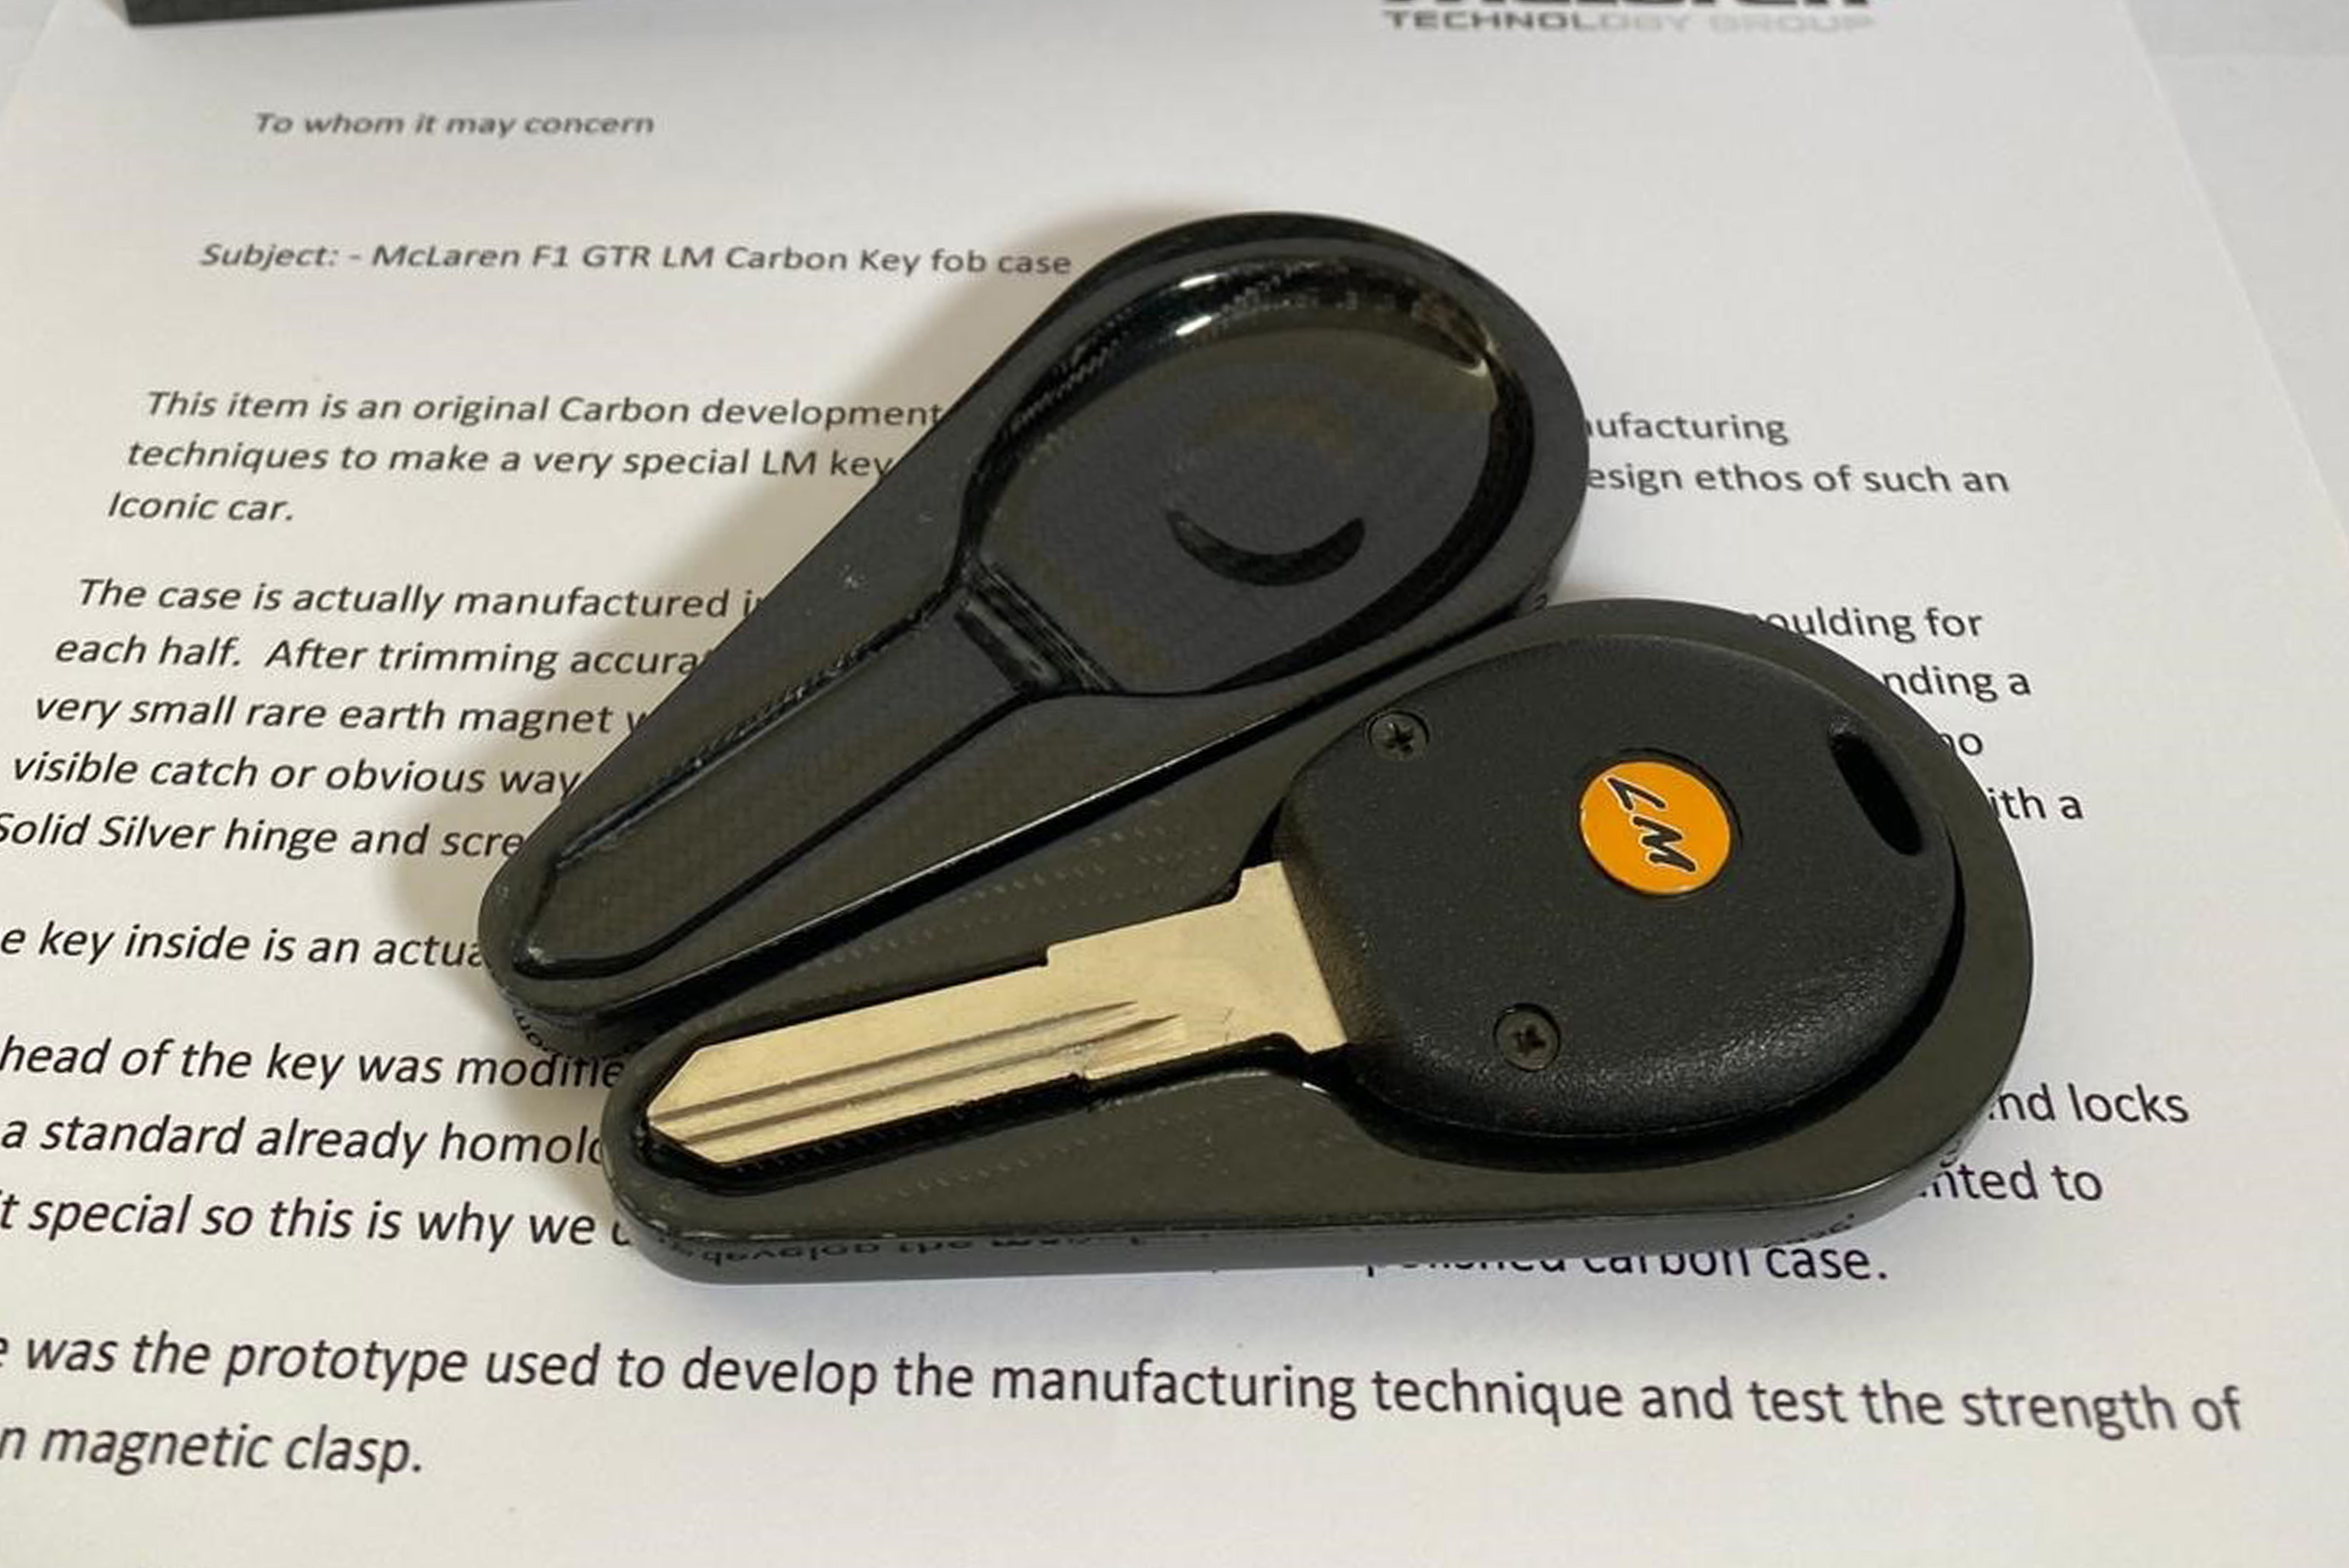 MCLAREN F1 LM KEY WITH PROTOTYPE CARBON KEY CASE for sale by auction in Auckland, New Zealand, New Zealand photo